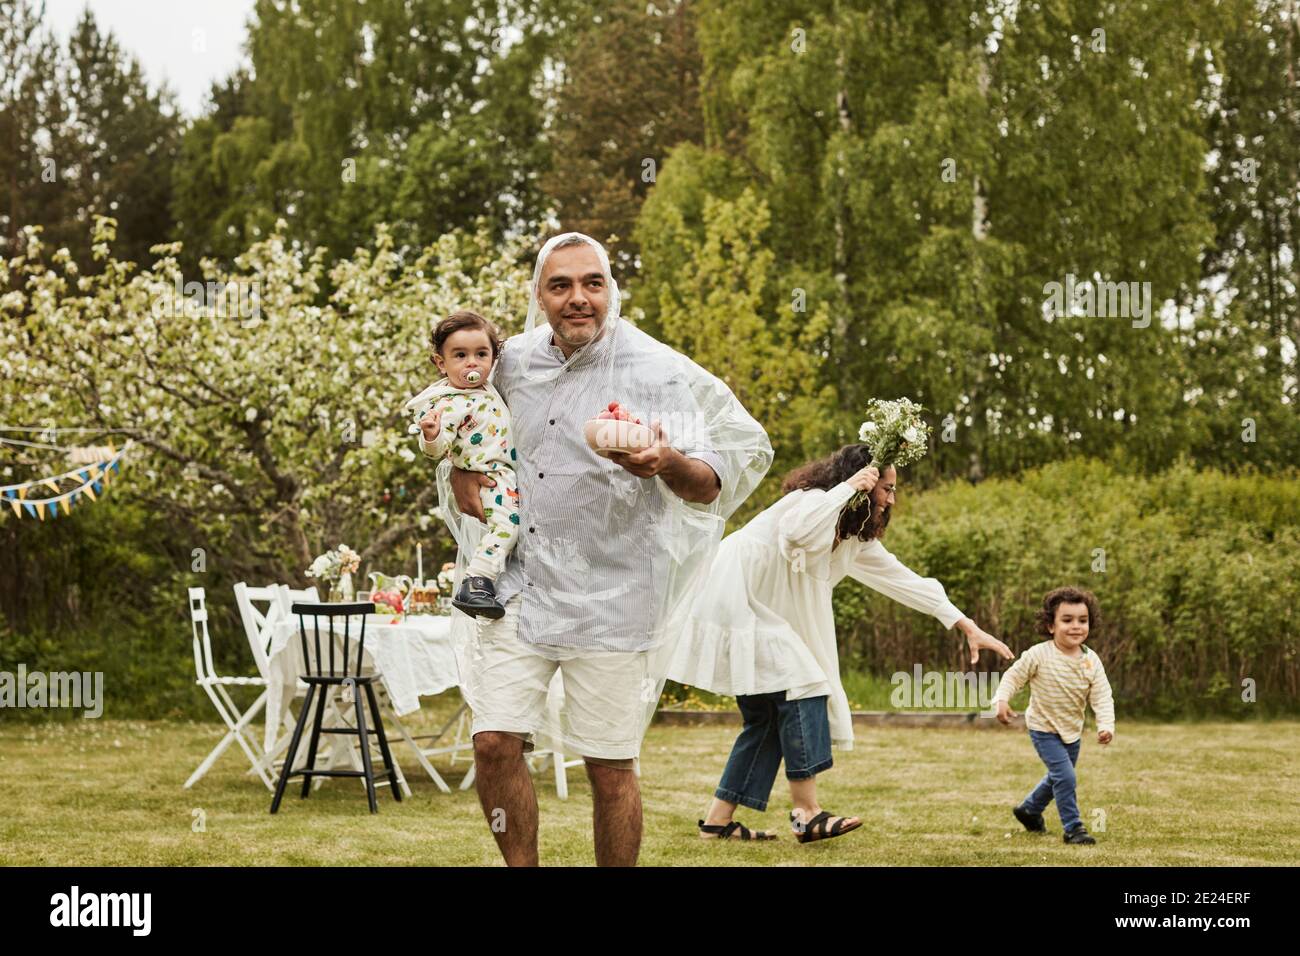 Happy family with kids in garden Stock Photo